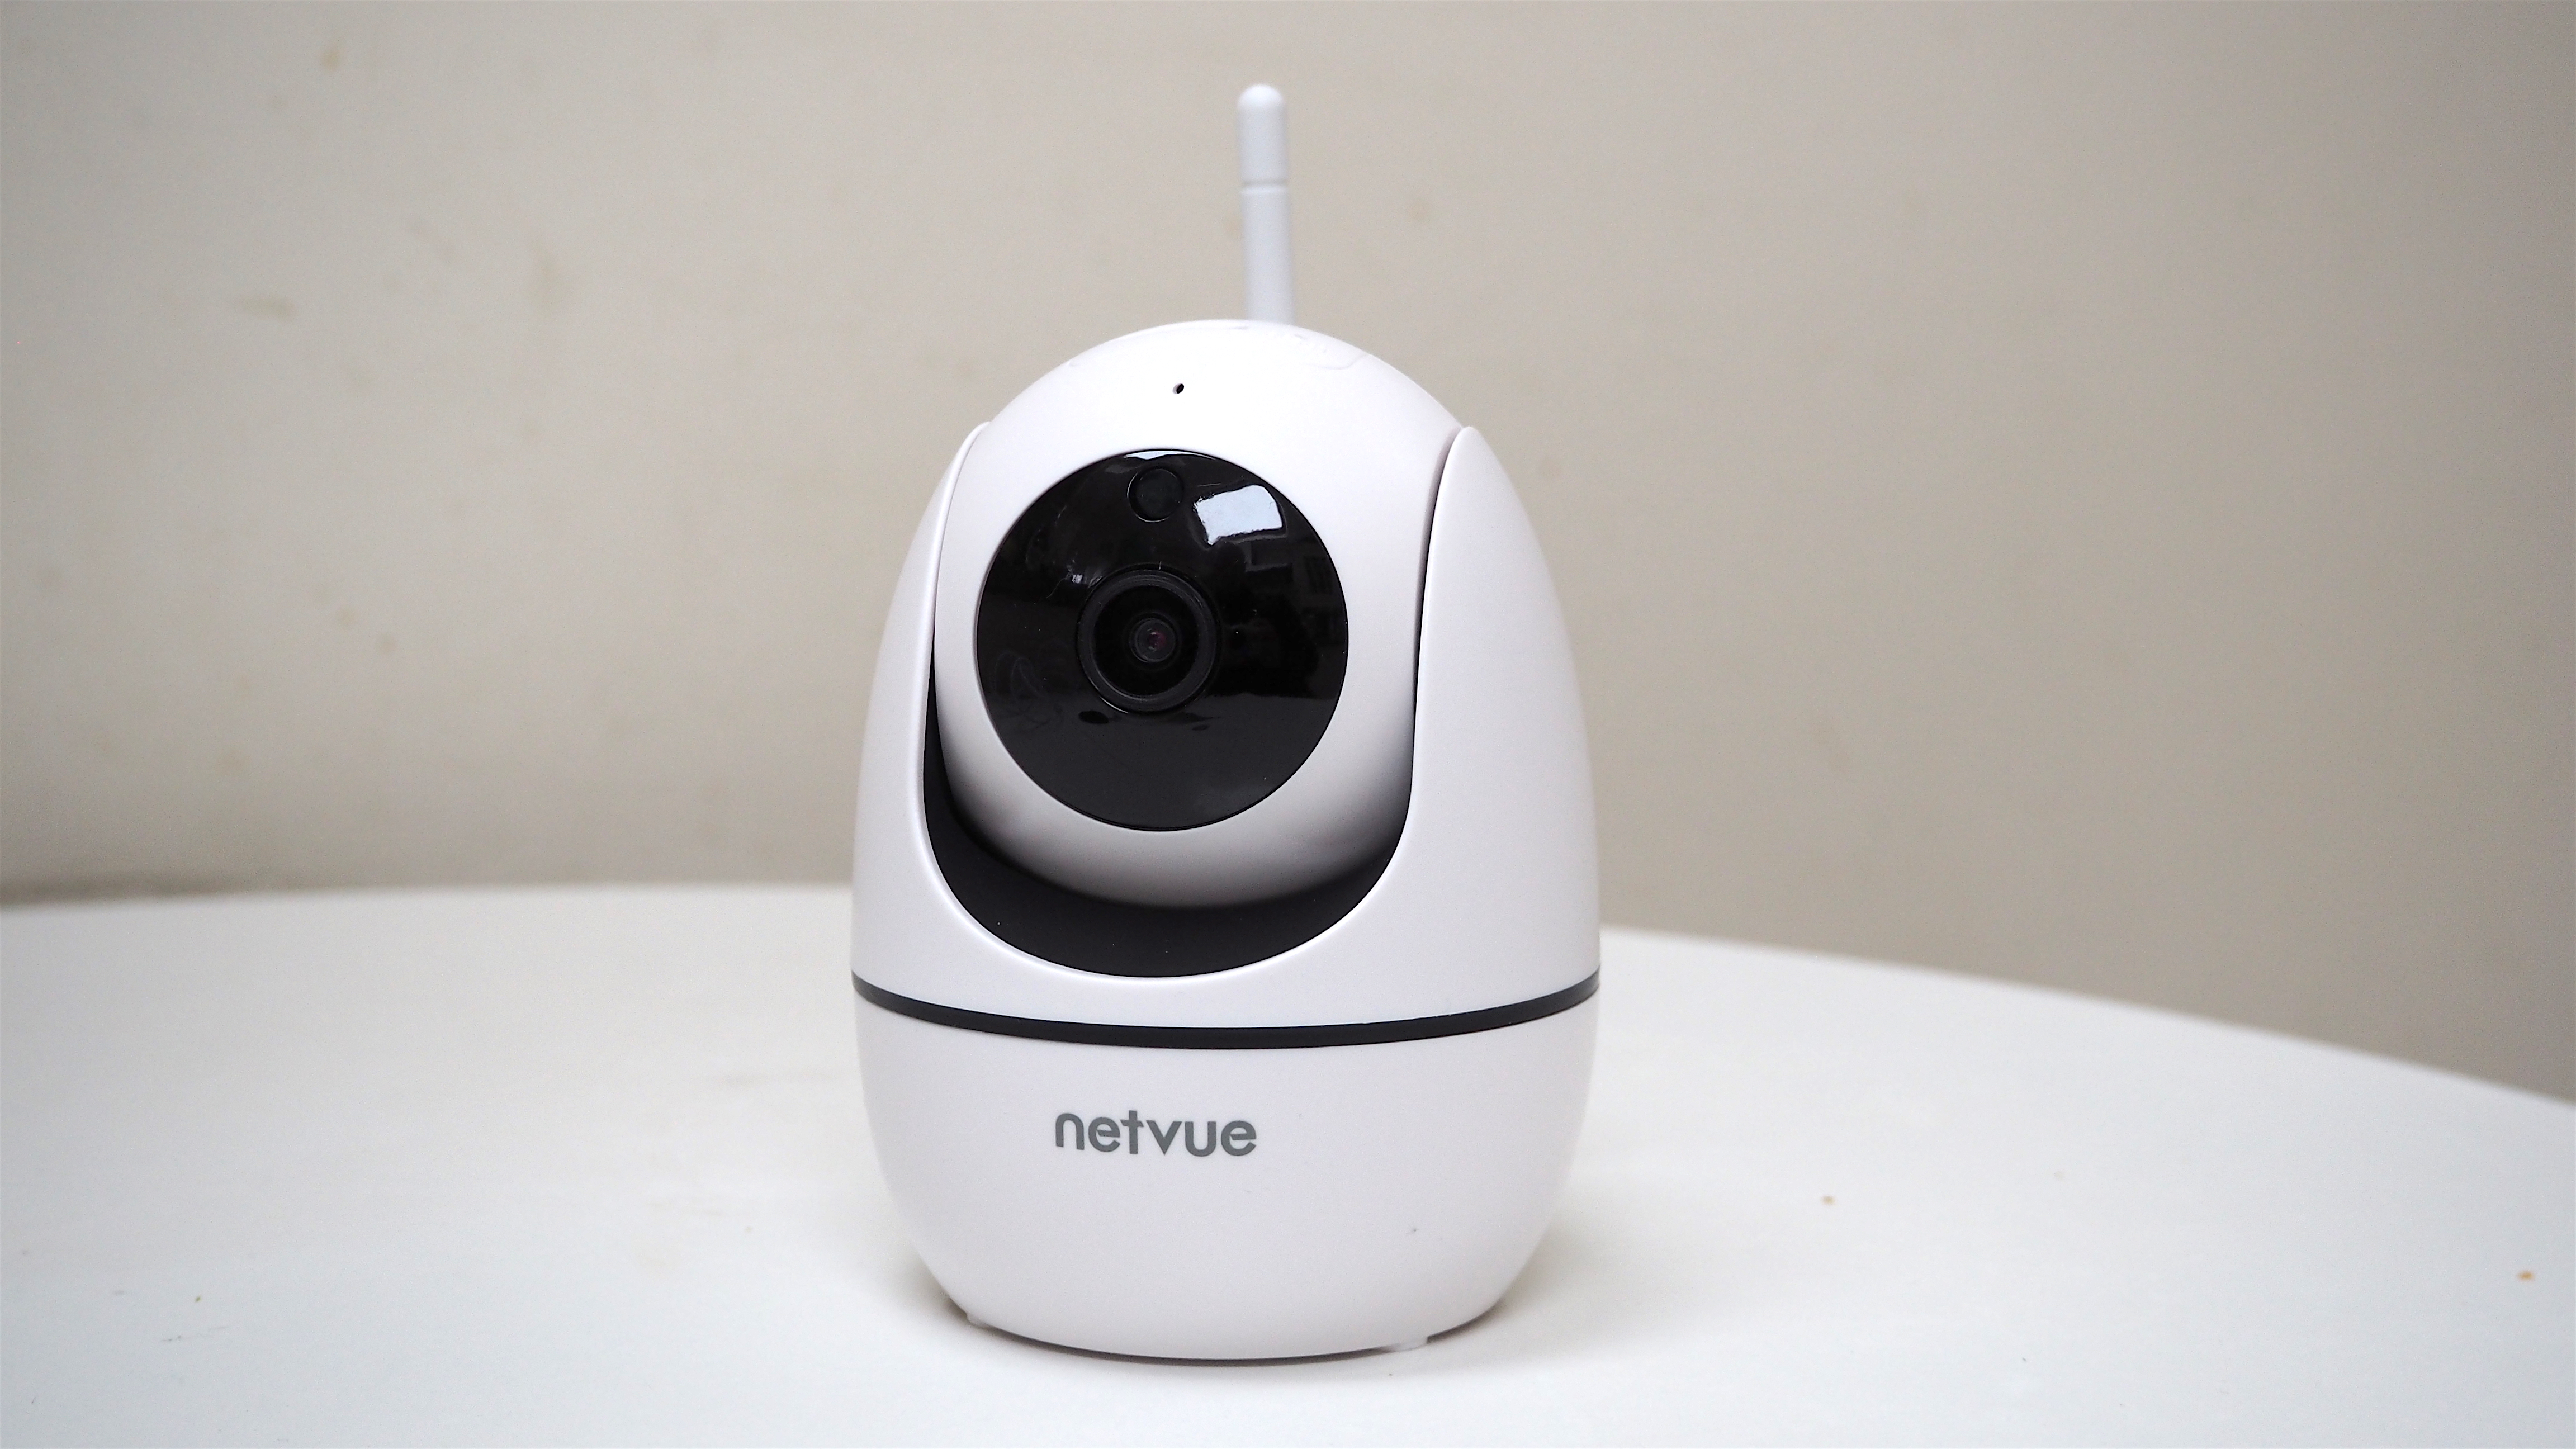 NetVue Orb Mini pet and security camera review